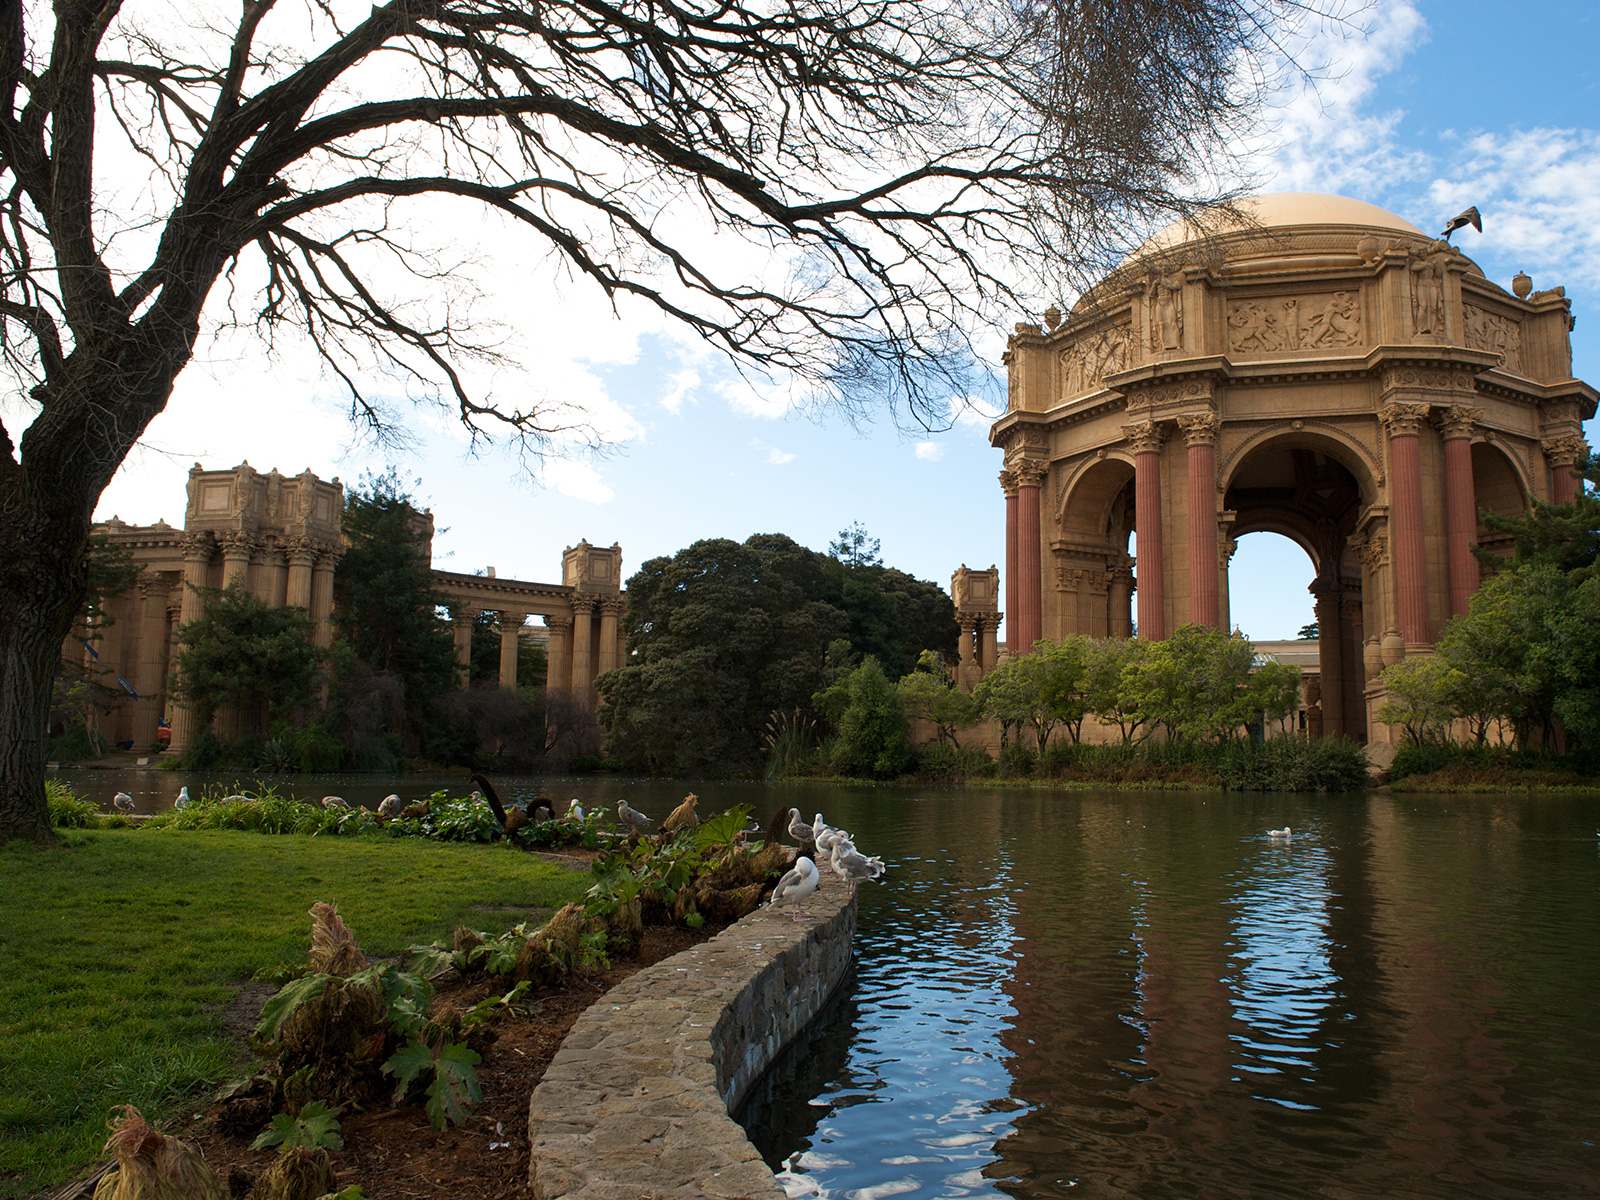 gardens and pond outside of the Palace of Fine Arts in San Francisco, California, USA